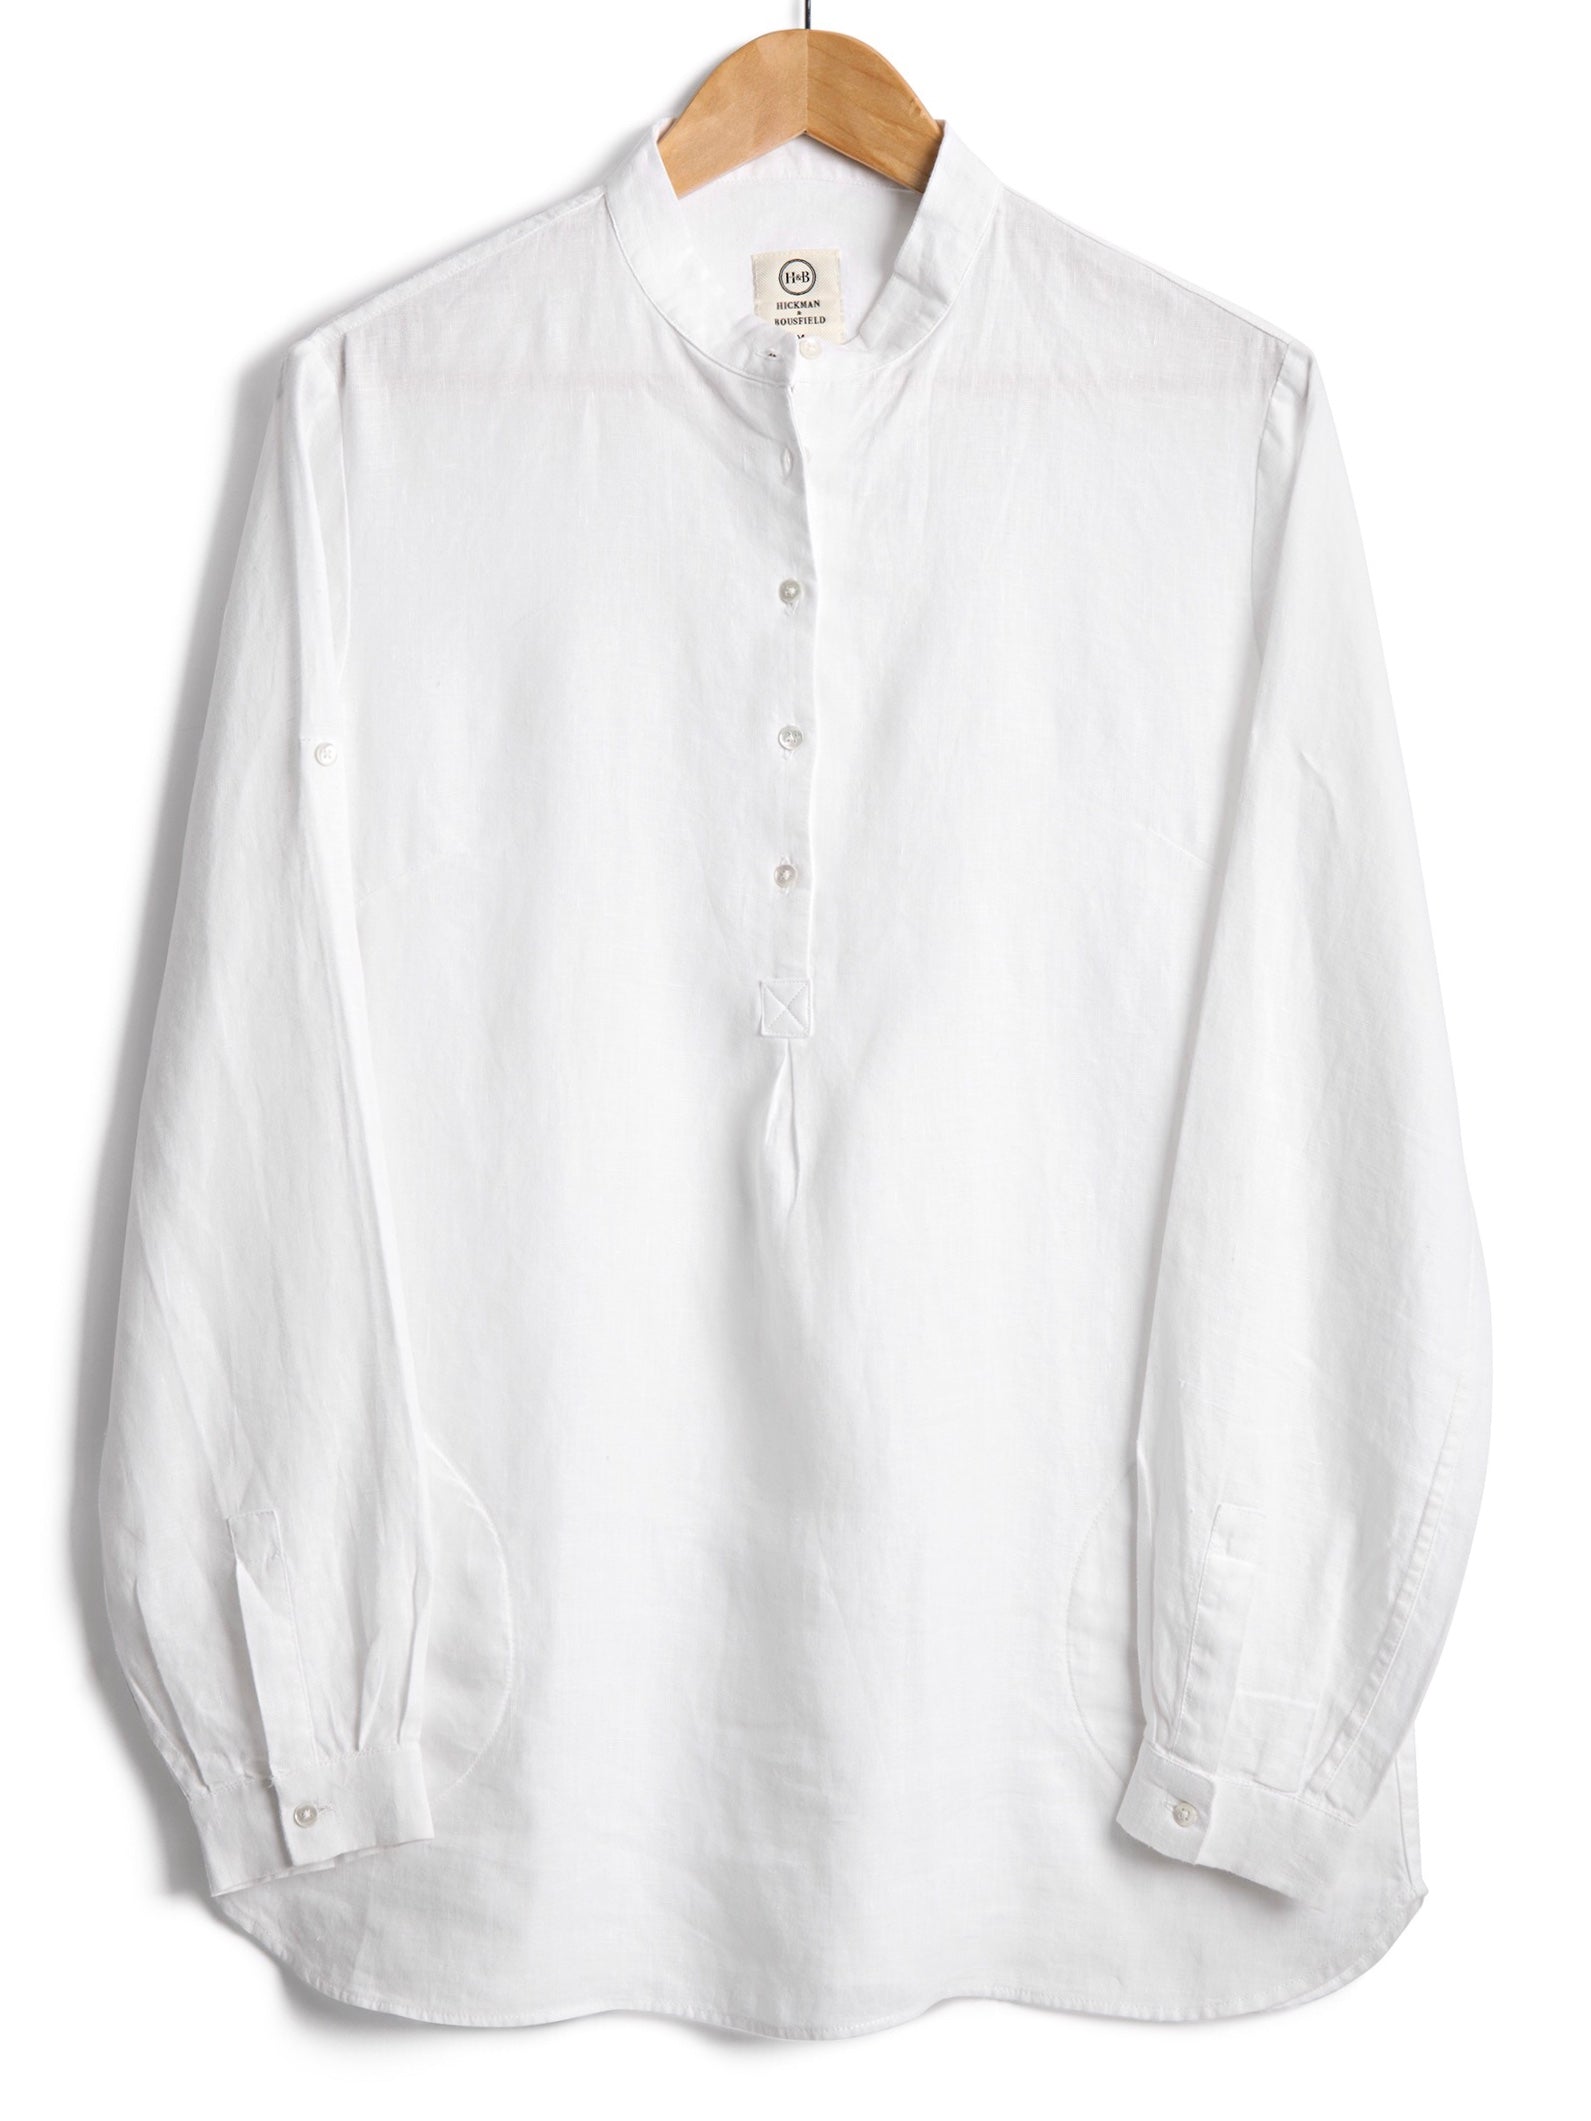 NEW TUNIC IN WHITE LINEN, Shirt, Hickman & Bousfield - Hickman & Bousfield, Safari and Travel Clothing